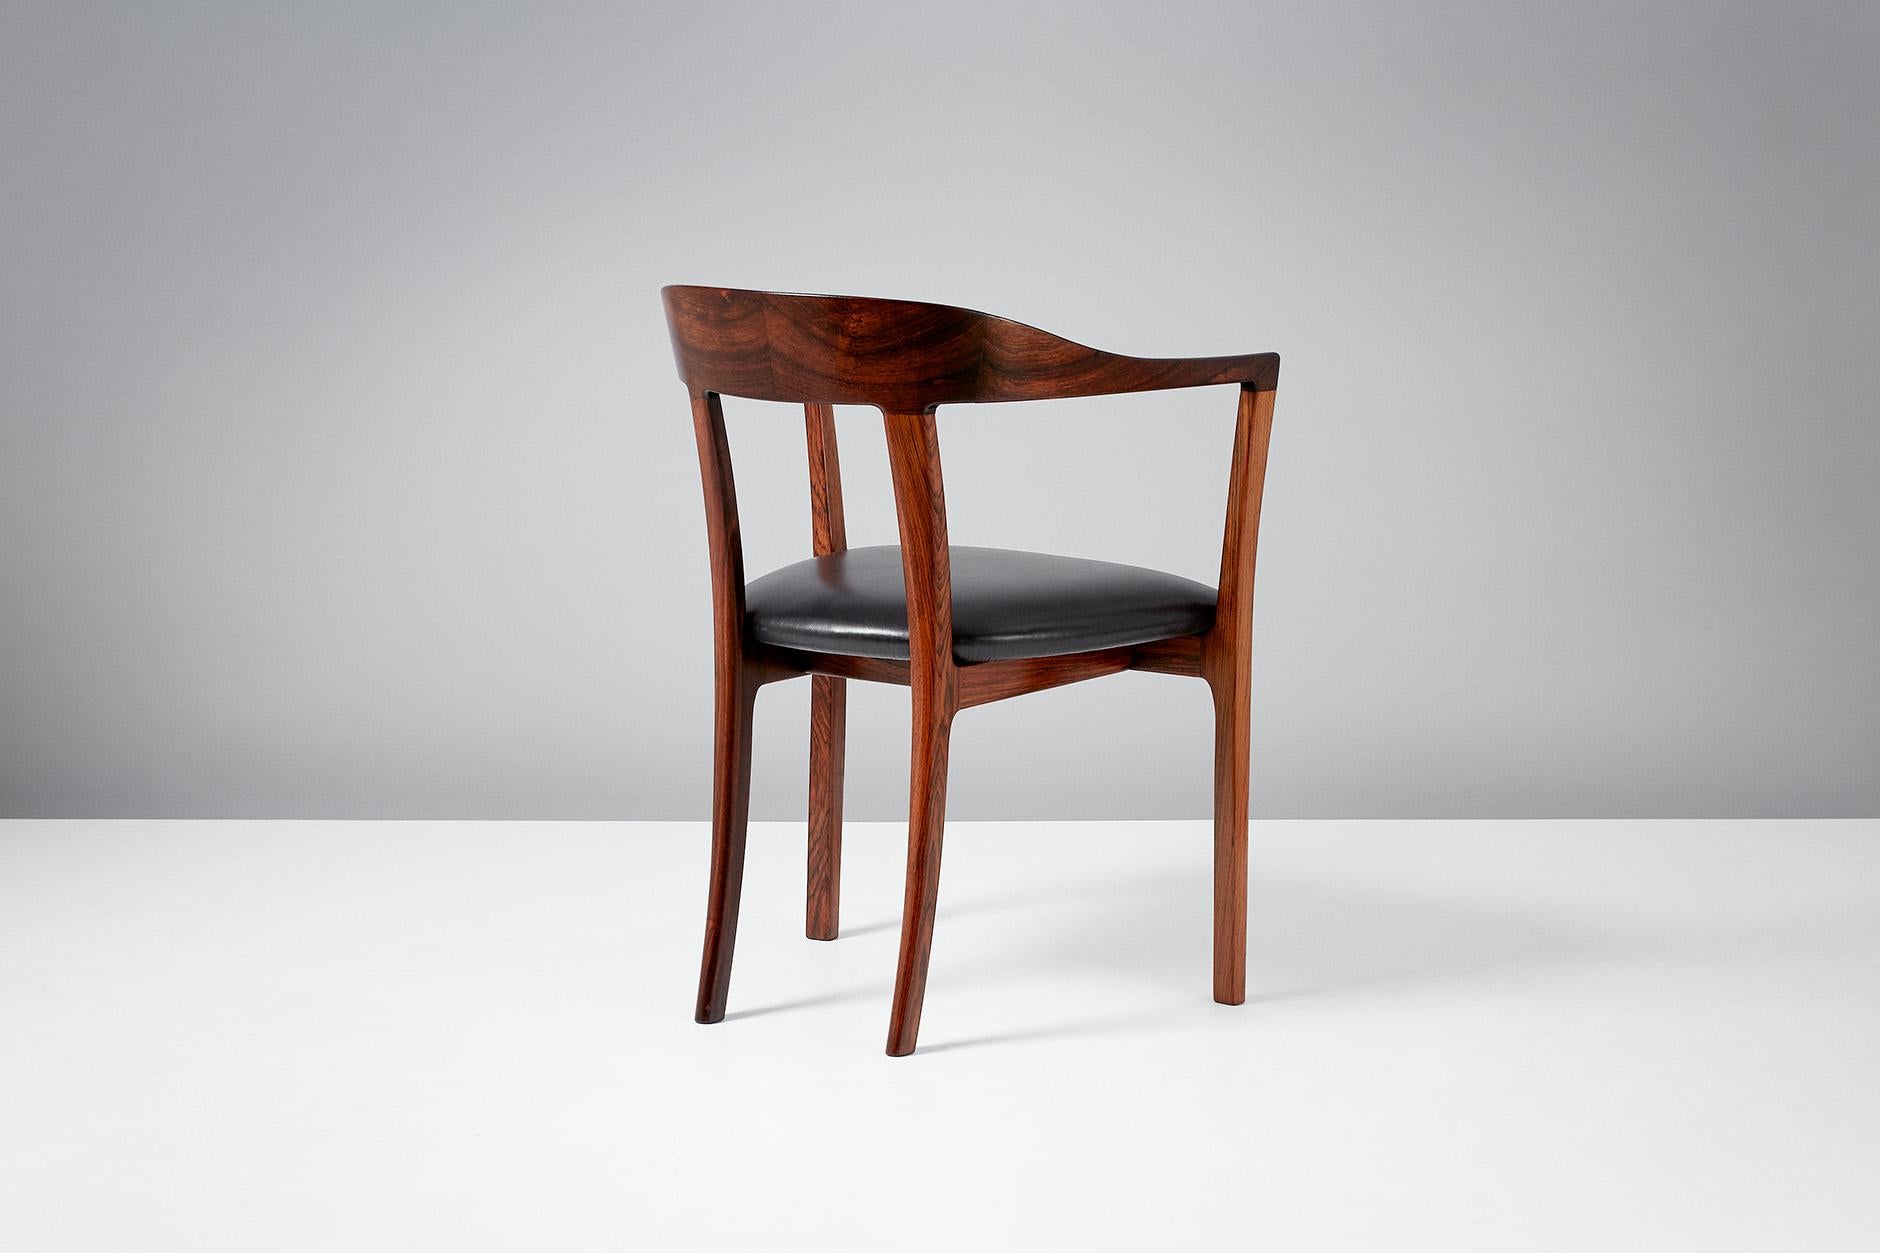 Ole Wanscher

J2883 armchair, 1958

Produced by master cabinetmaker A.J. Iversen in sumptuous Brazilian rosewood with aniline black leather seat. First presented at the Copenhagen Cabinetmakers' Guild in 1958. A rarely seen and highly